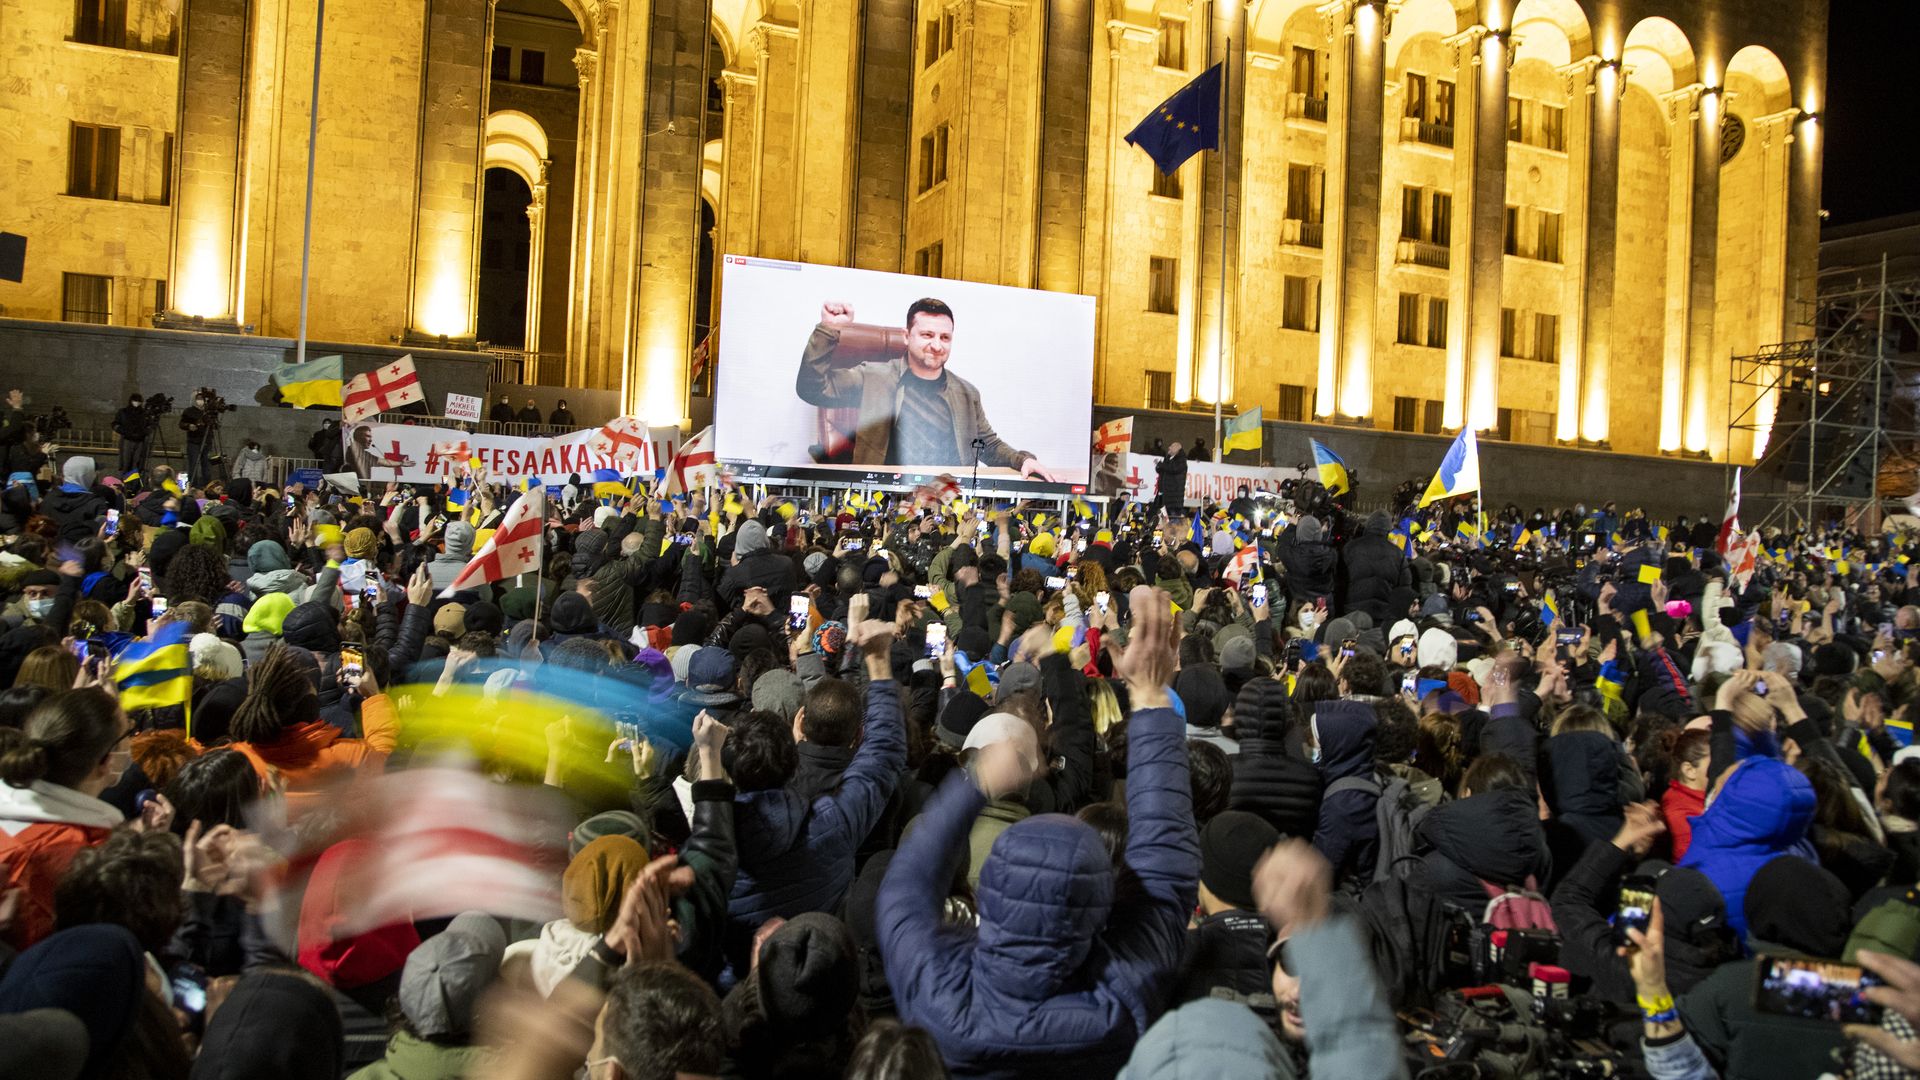 Ukrainian President Volodymyr Zelensky speech is streamed live on a big screen in front of Parliament during a rally in support of Ukraine on March 4, 2022 in Tbilisi, Georgia.